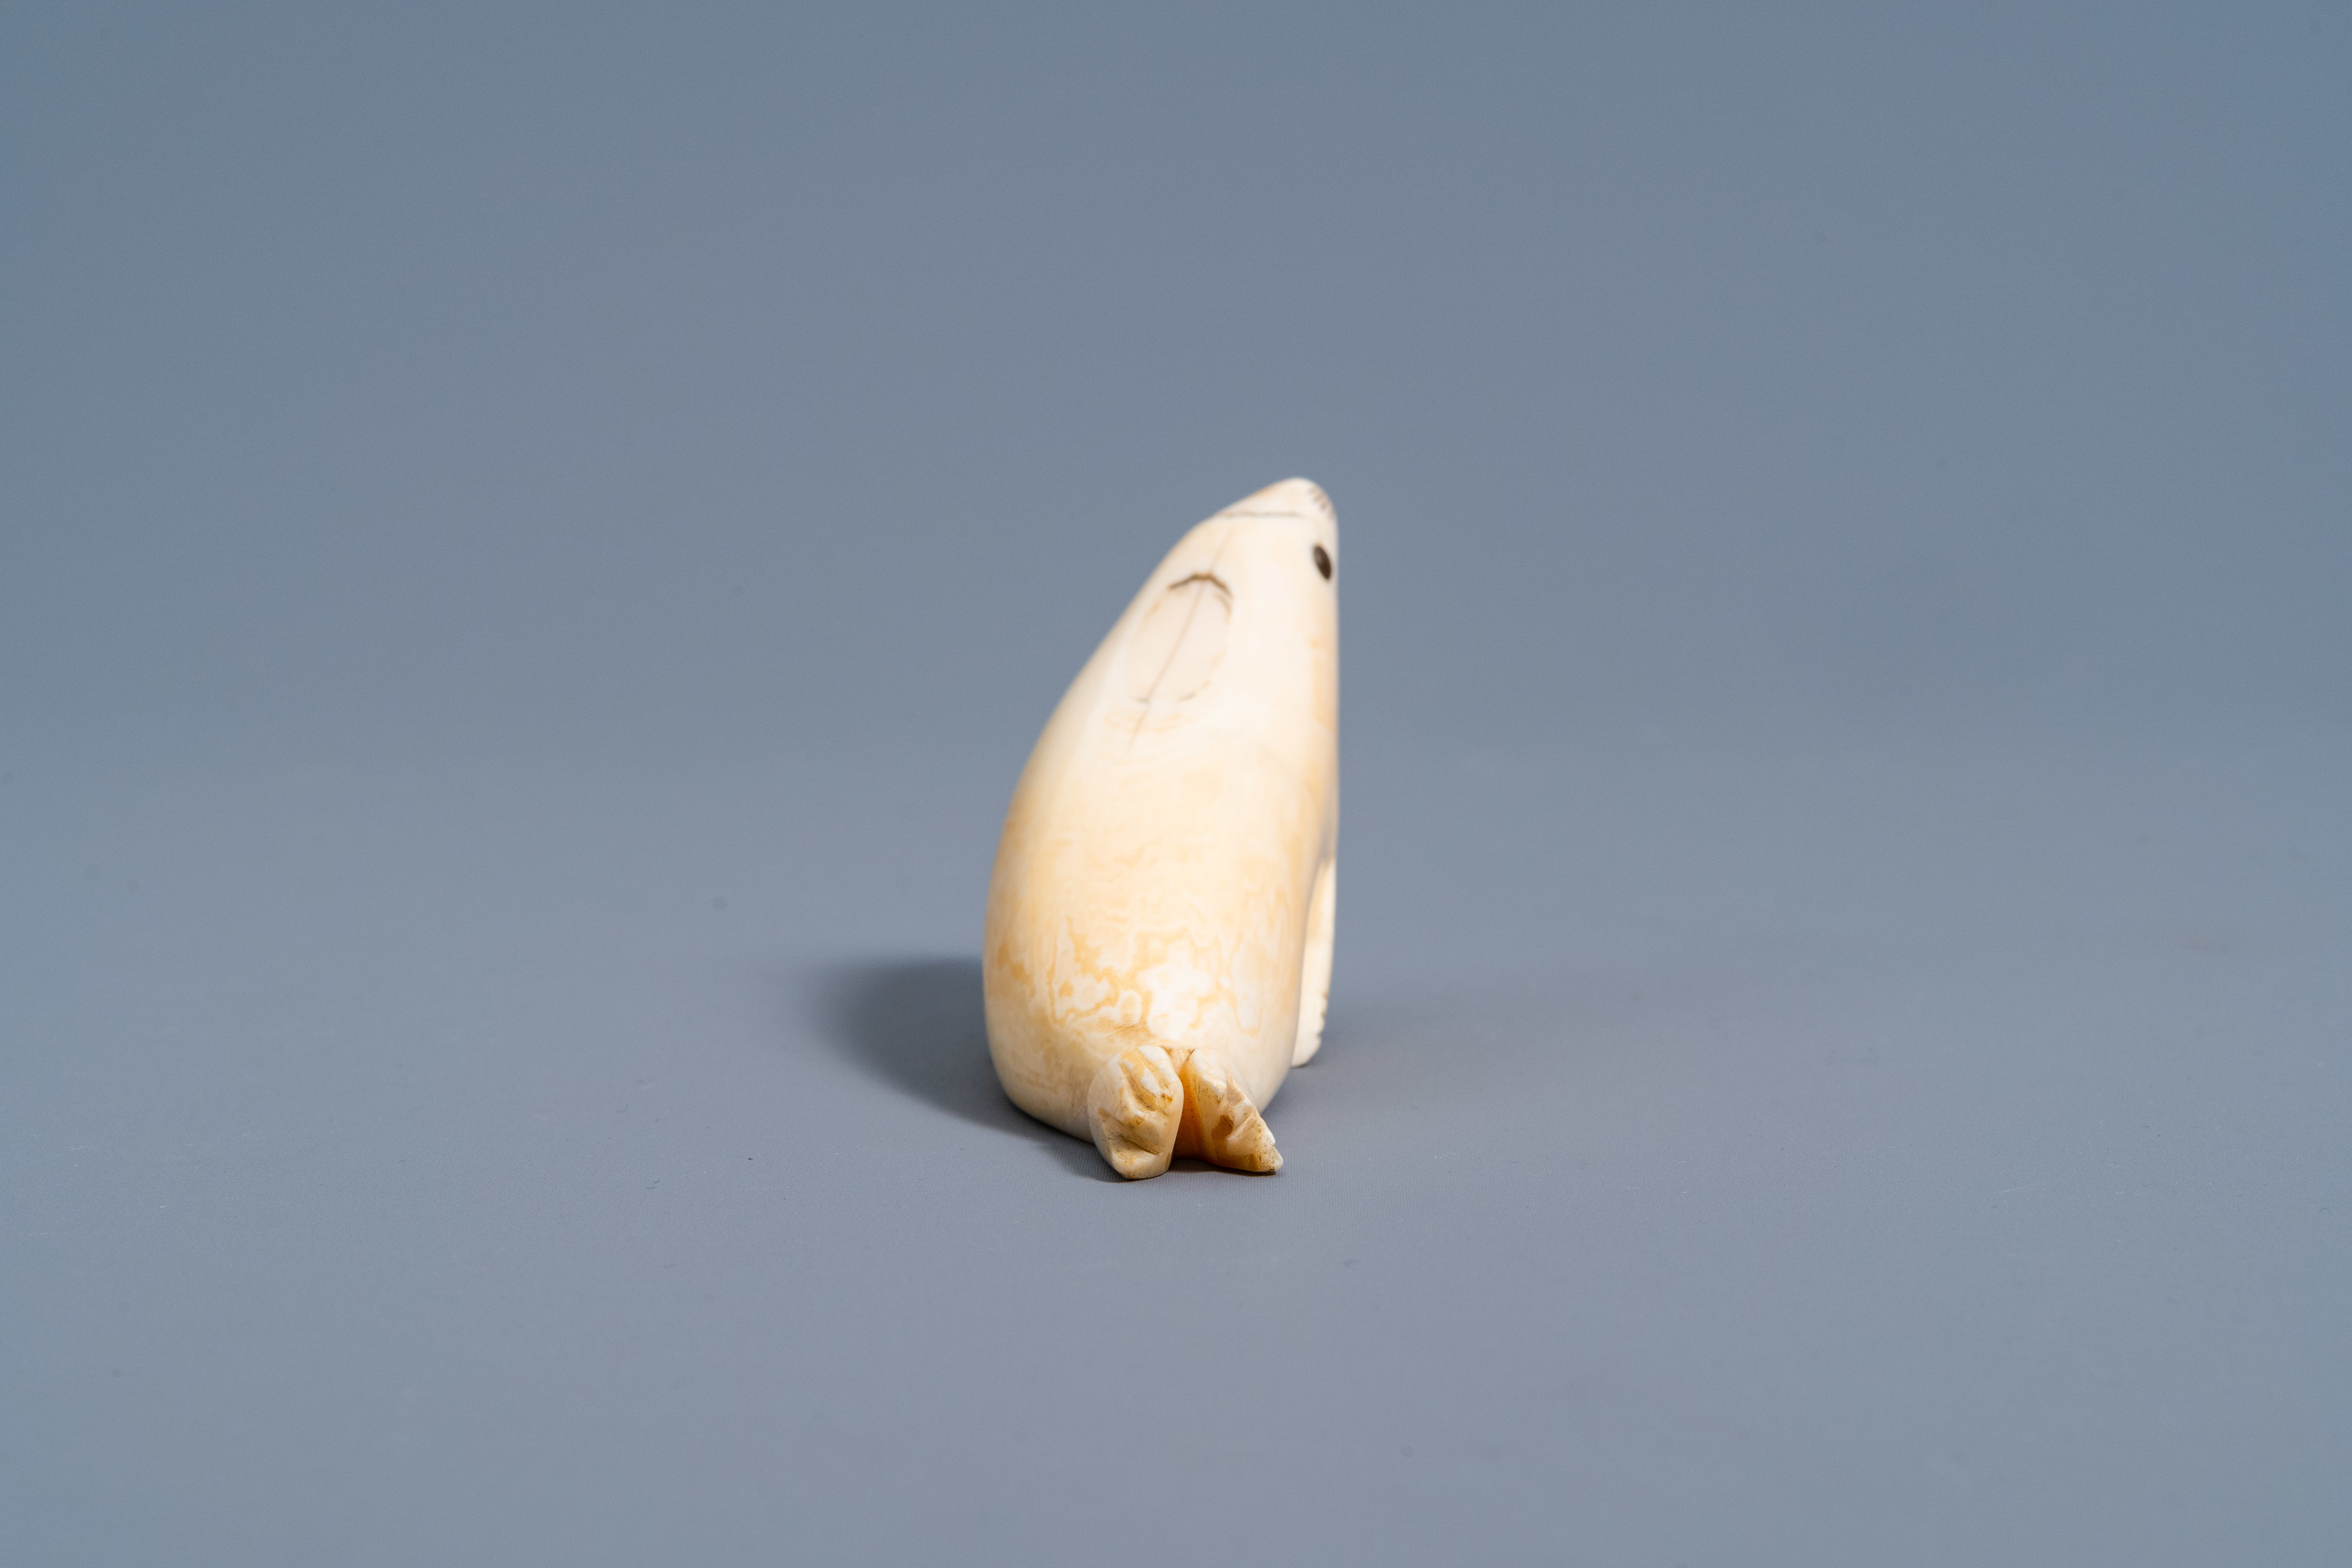 An Inuit carved whale ivory figure of a seal, Canada or Alaska, 19th C. - Image 6 of 11